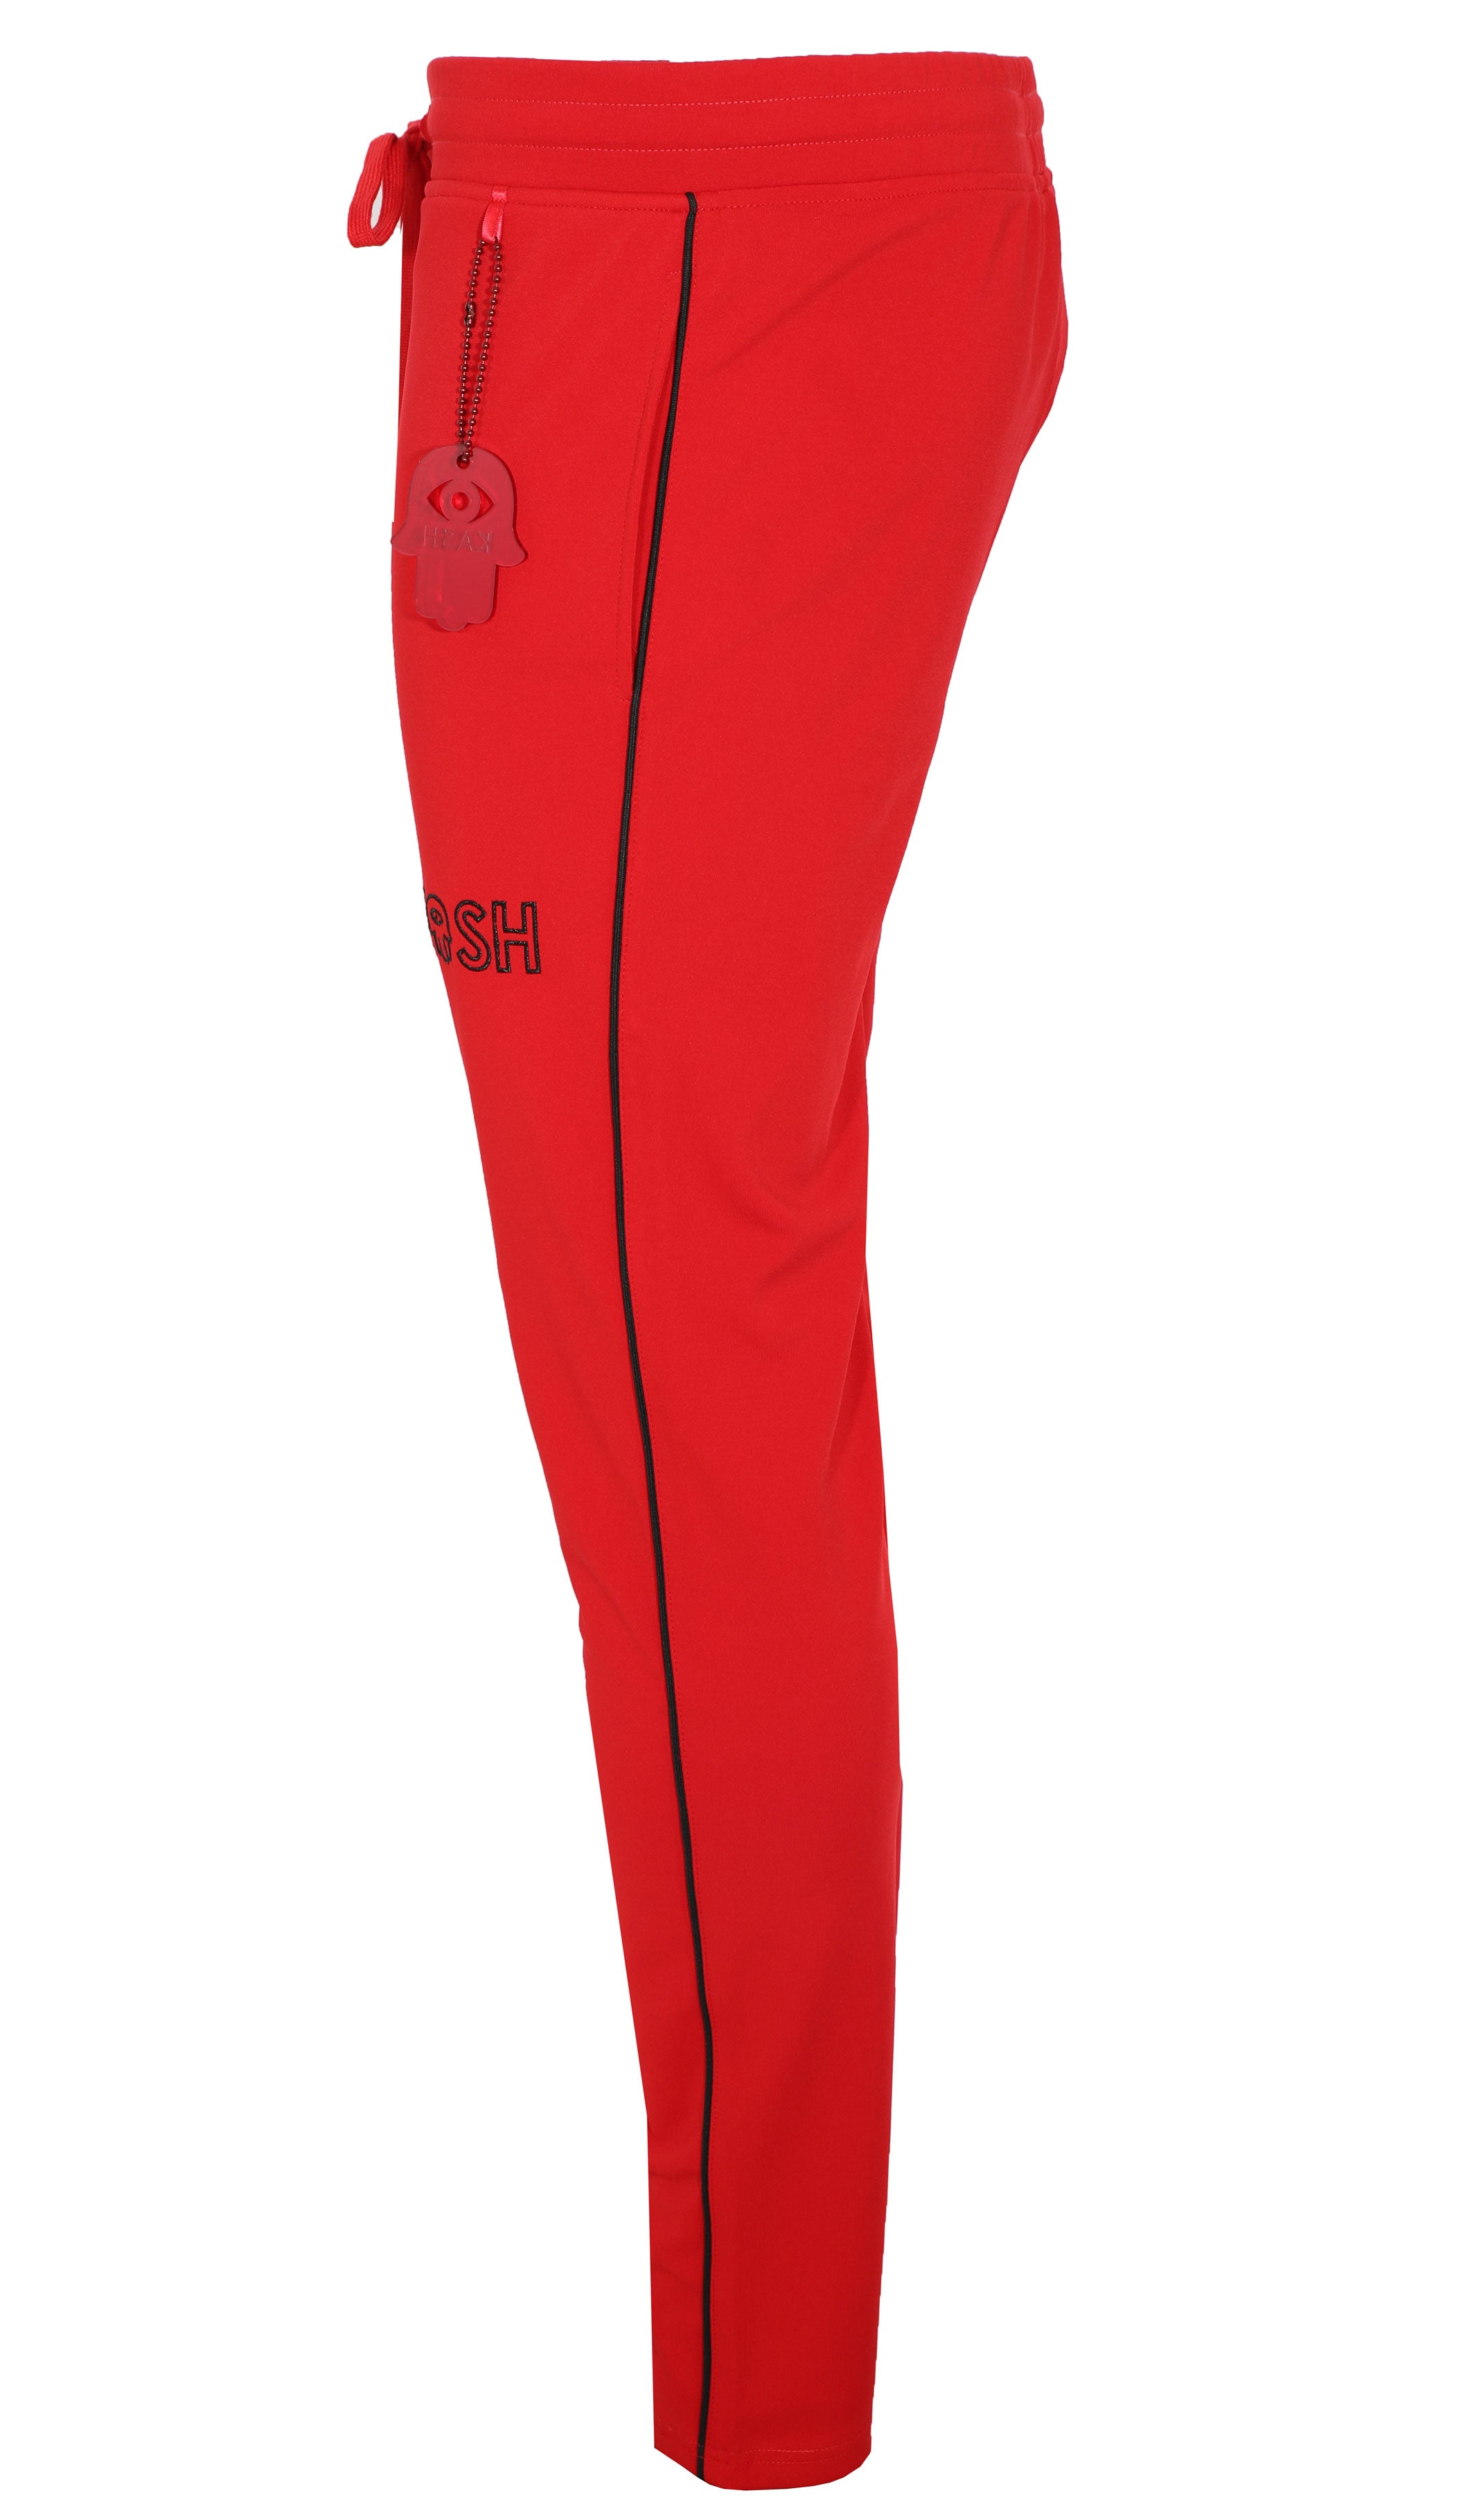 KASH PIPE TRACK PANTS - RED